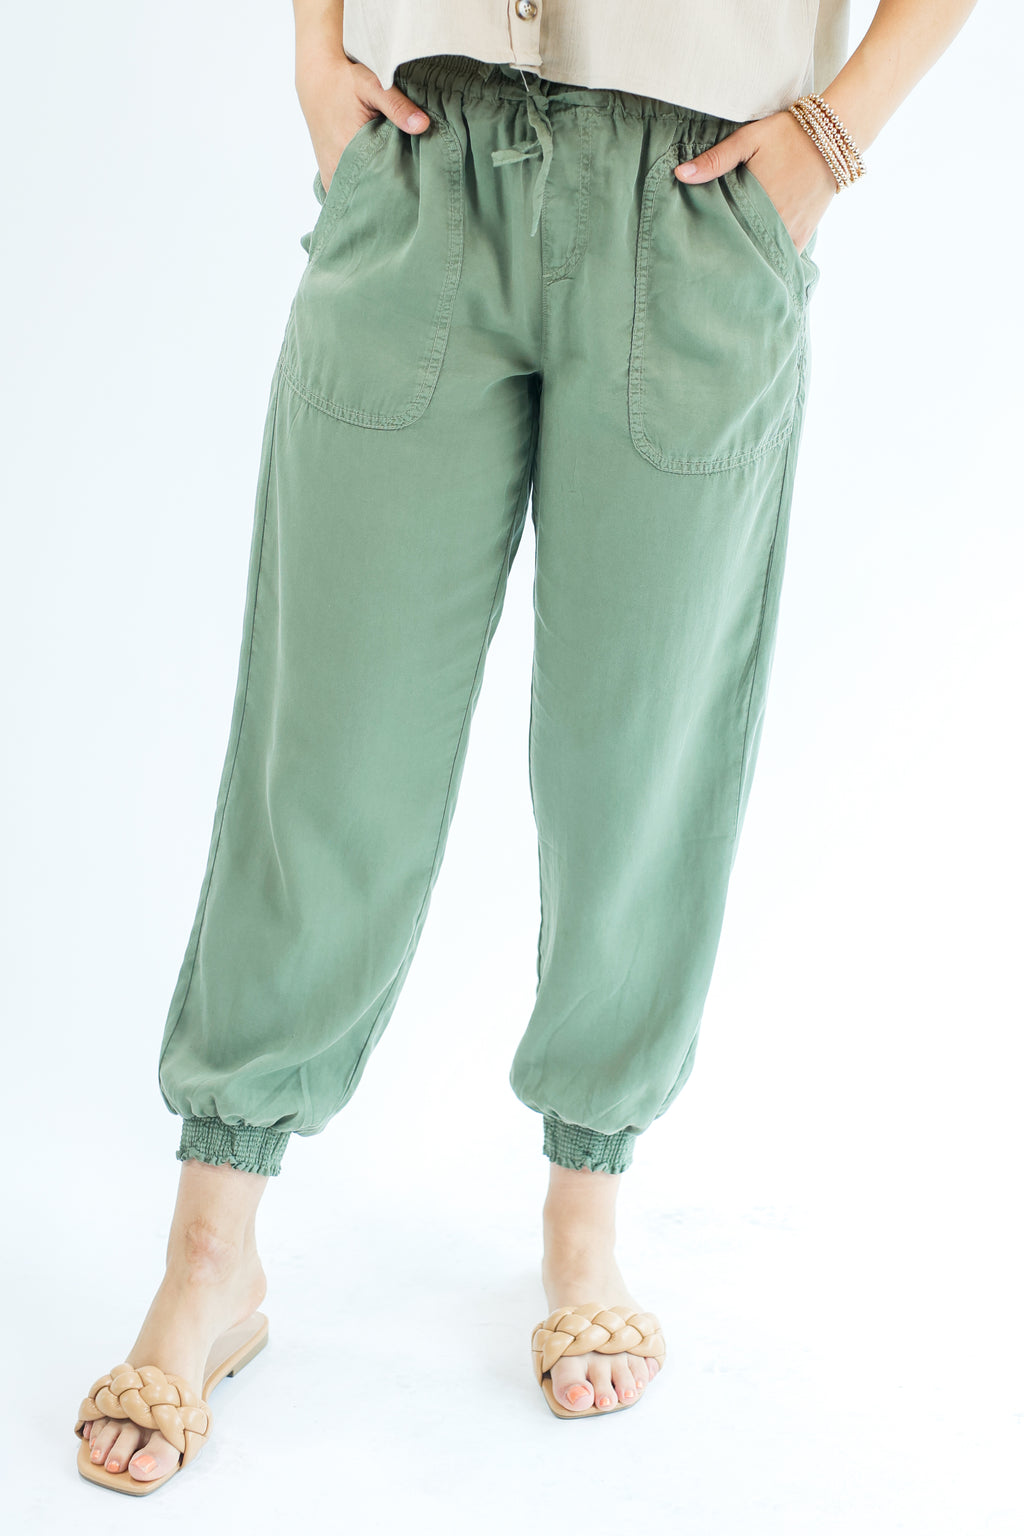 Cue The Music Joggers In Olive